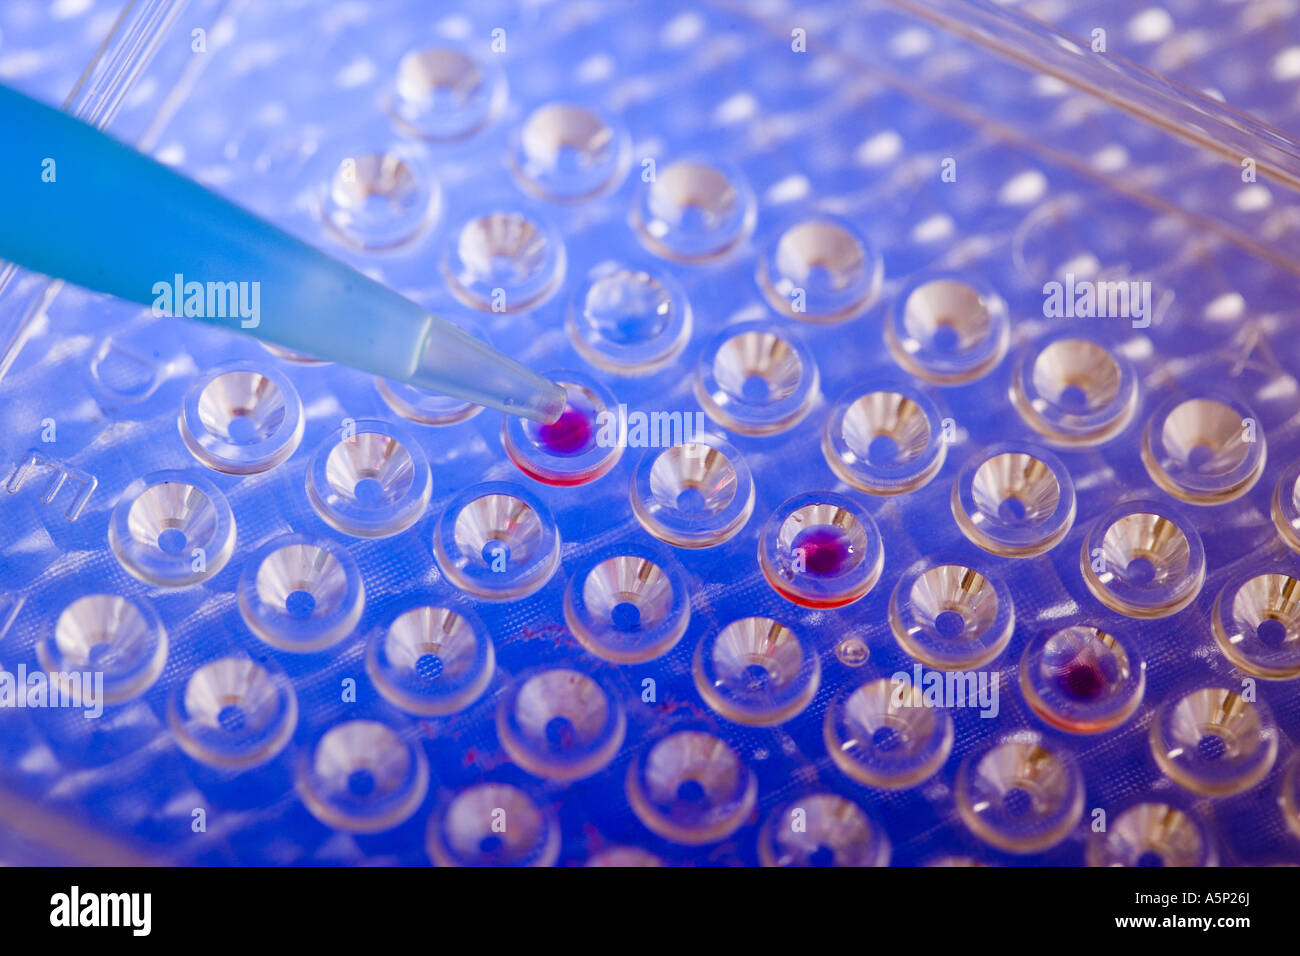 Microtiter plate with pipette filling certain wells for research. Stock Photo